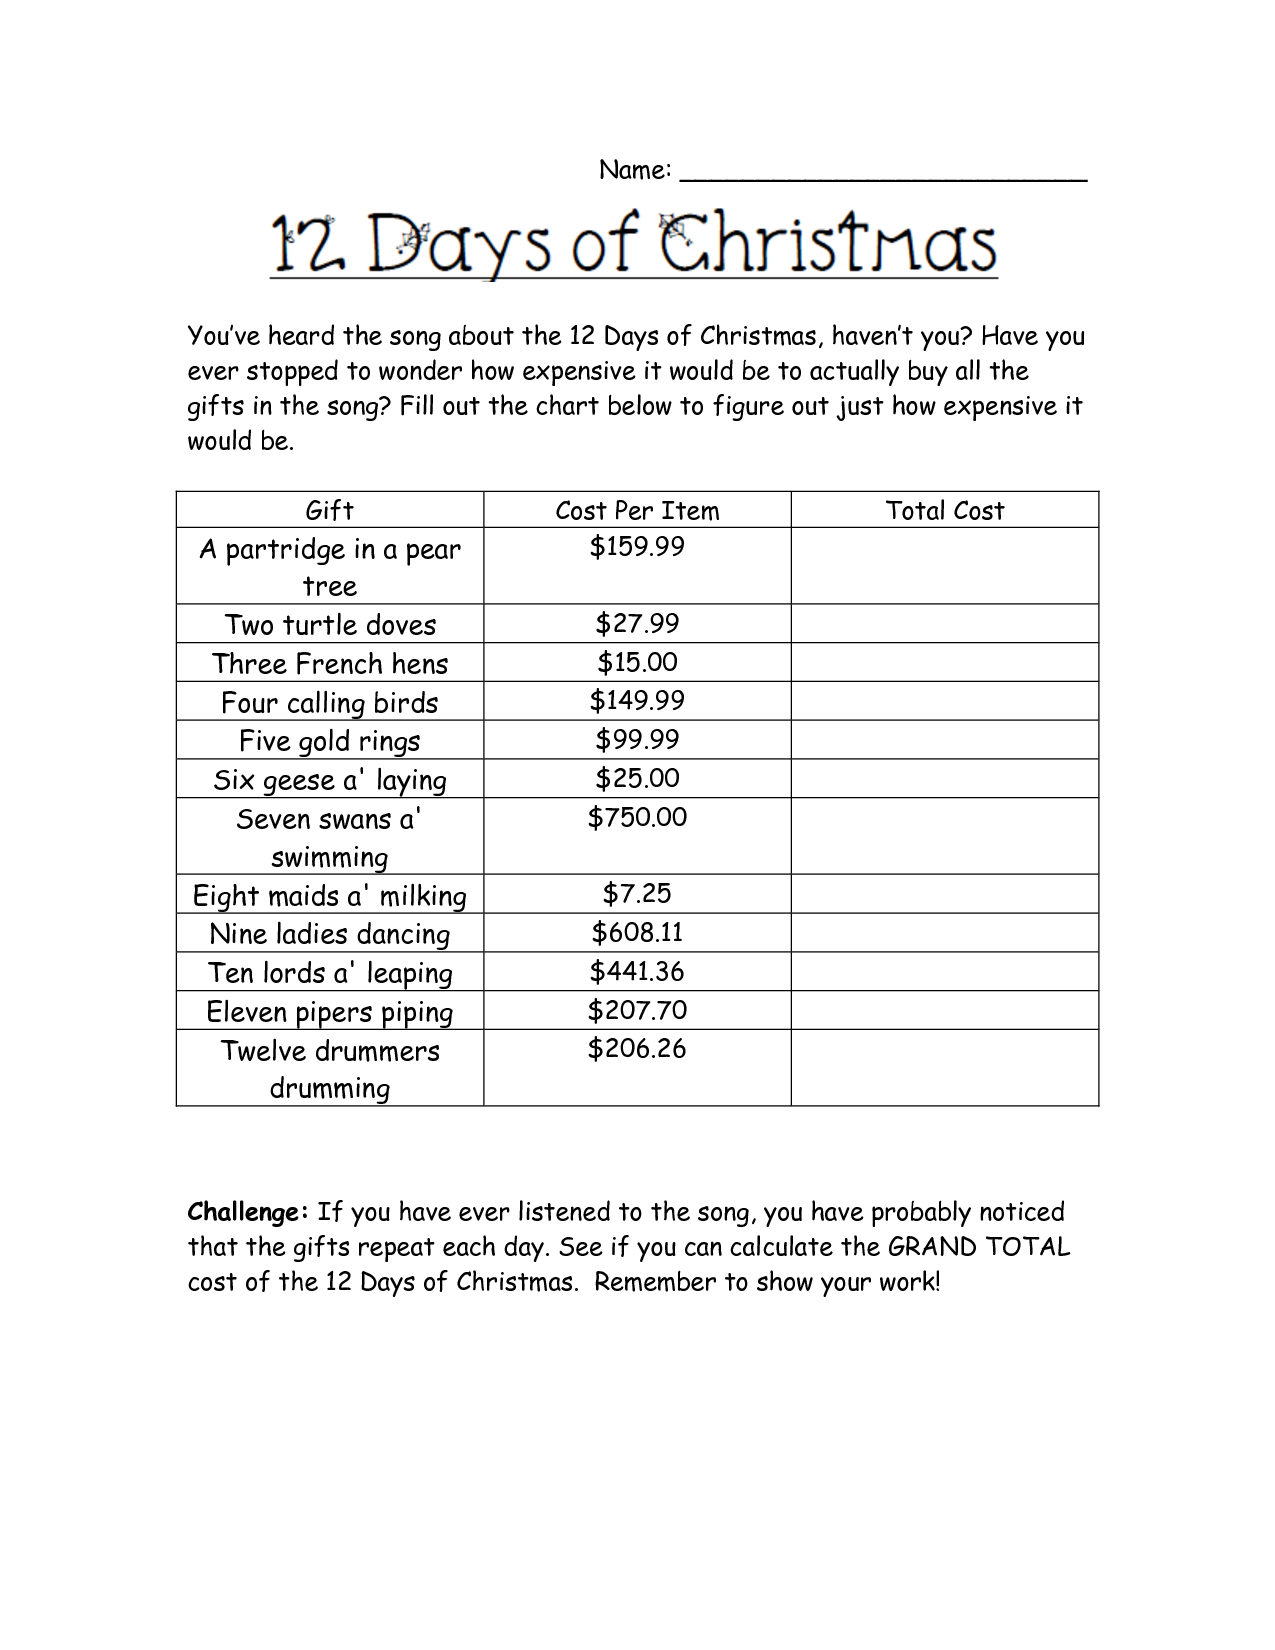 Holiday Math Worksheets Cost Of Christmas Worksheet 10th Grade Math Holiday Math Worksheets Christmas Math Worksheets Kindergarten